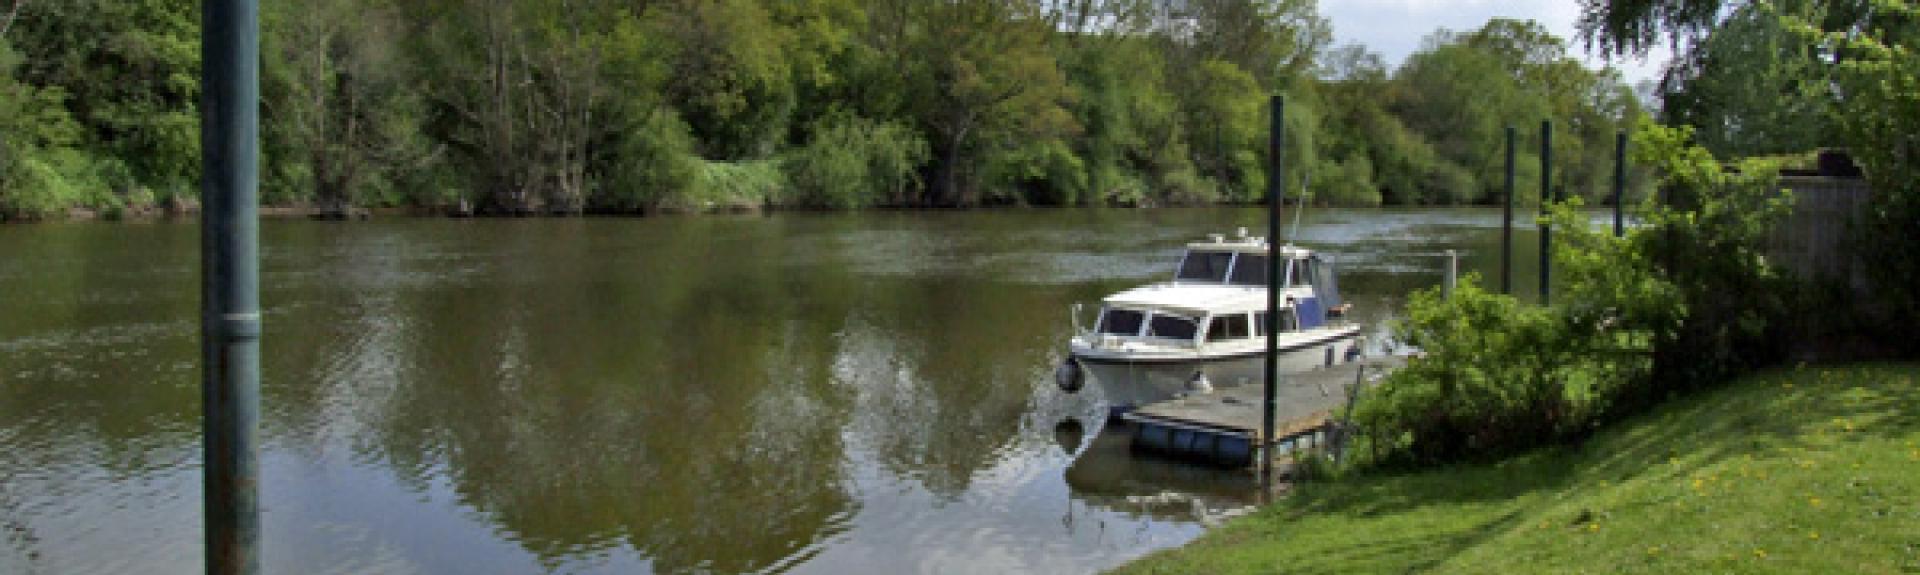 A lawn slope down boat moored on the banks of the River Severn